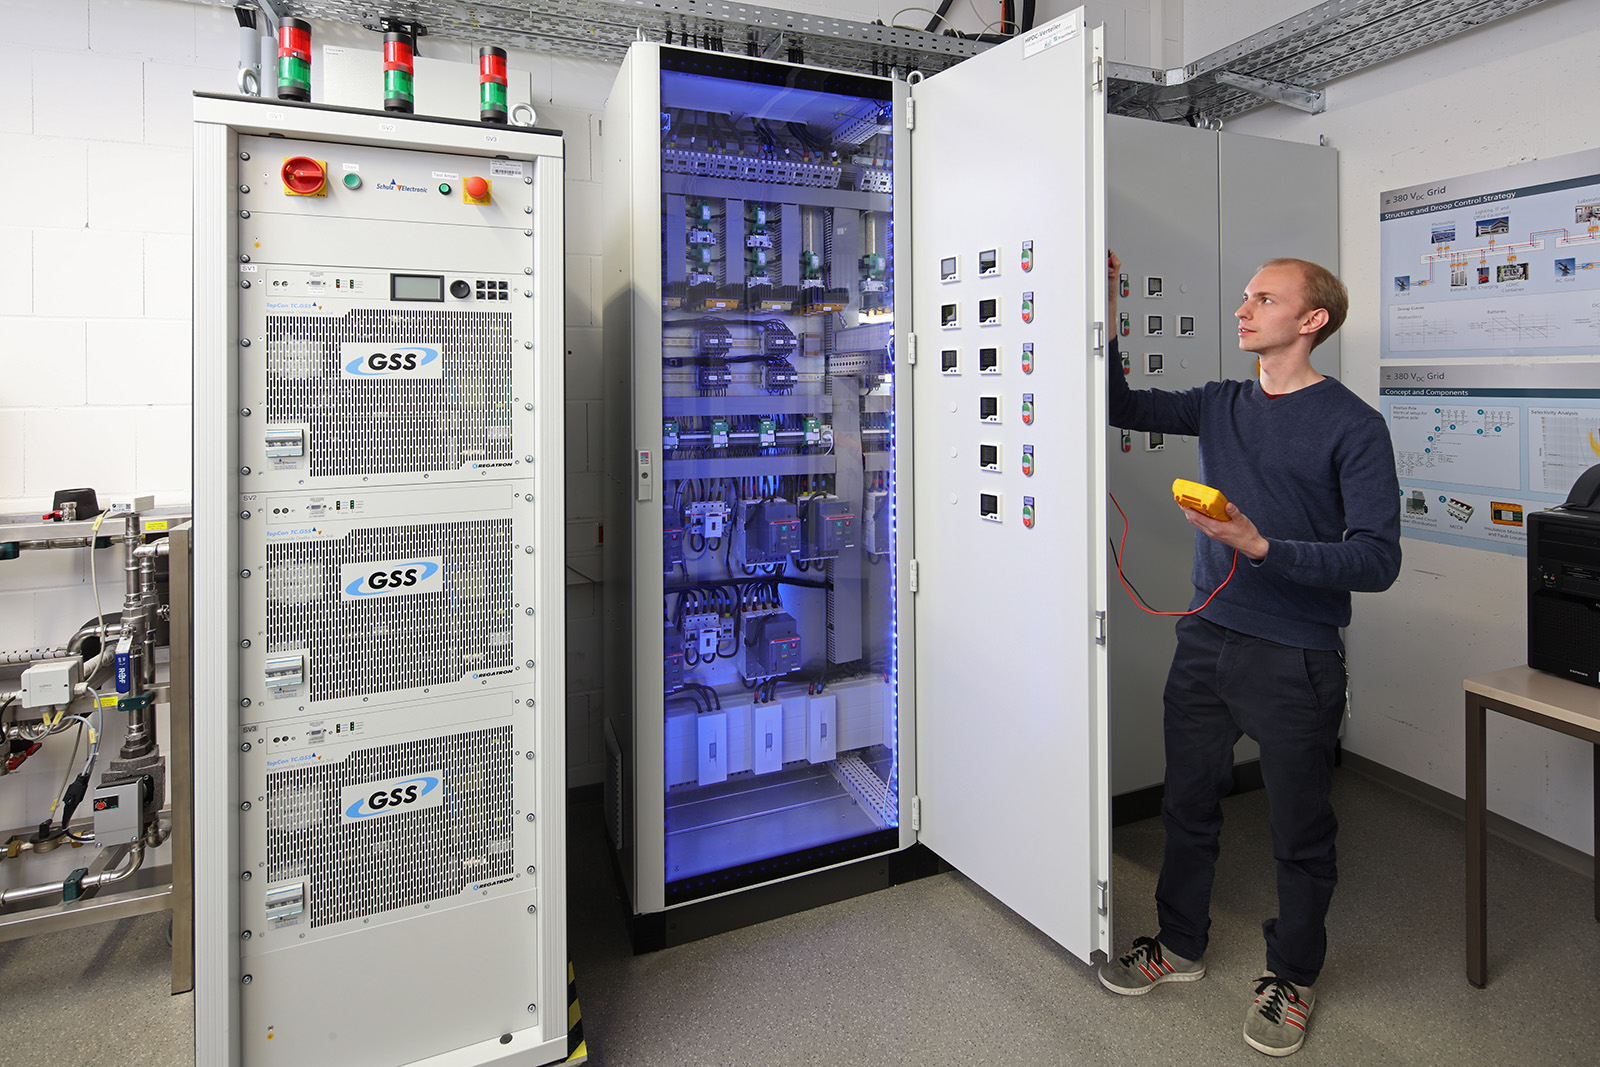 Work on the main distribution neutral unit for the DC test grid at Fraunhofer IISB.